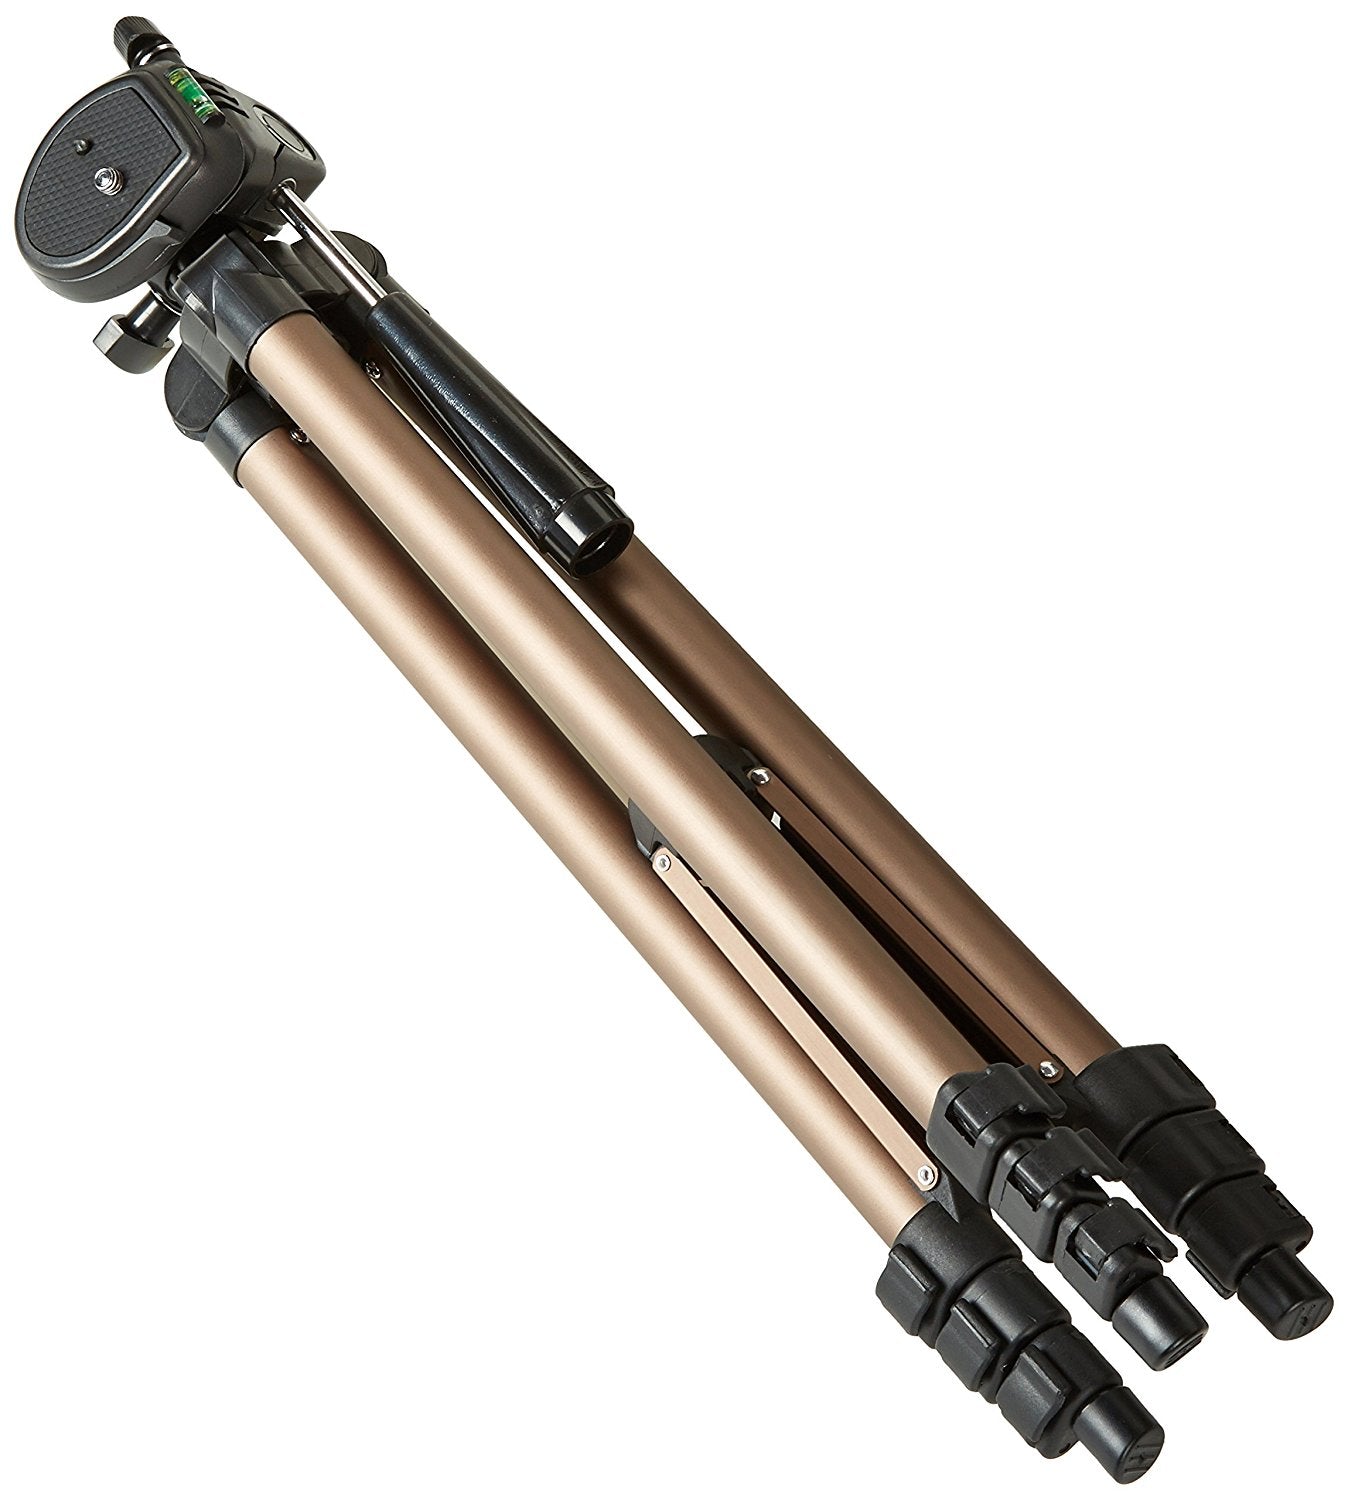 50-Inch Lightweight Tripod with Bag